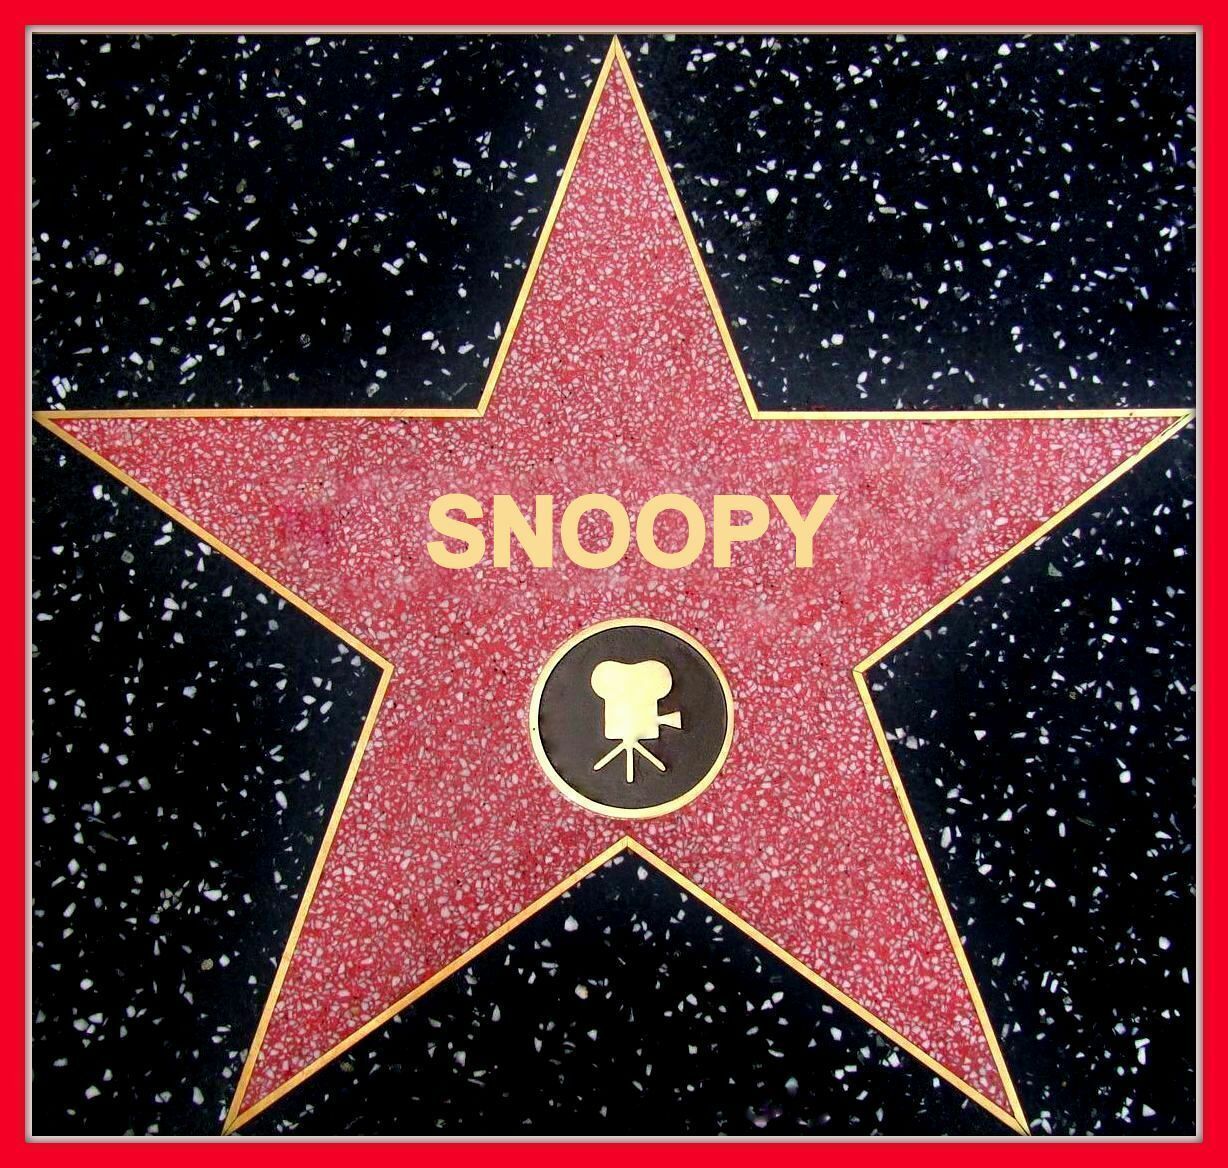 CUSTOMIZED HOLLYWOOD WALK OF FAME STAR STICKER DECAL ADD YOUR NAME ALL SIZES - £5.72 GBP - £9.54 GBP